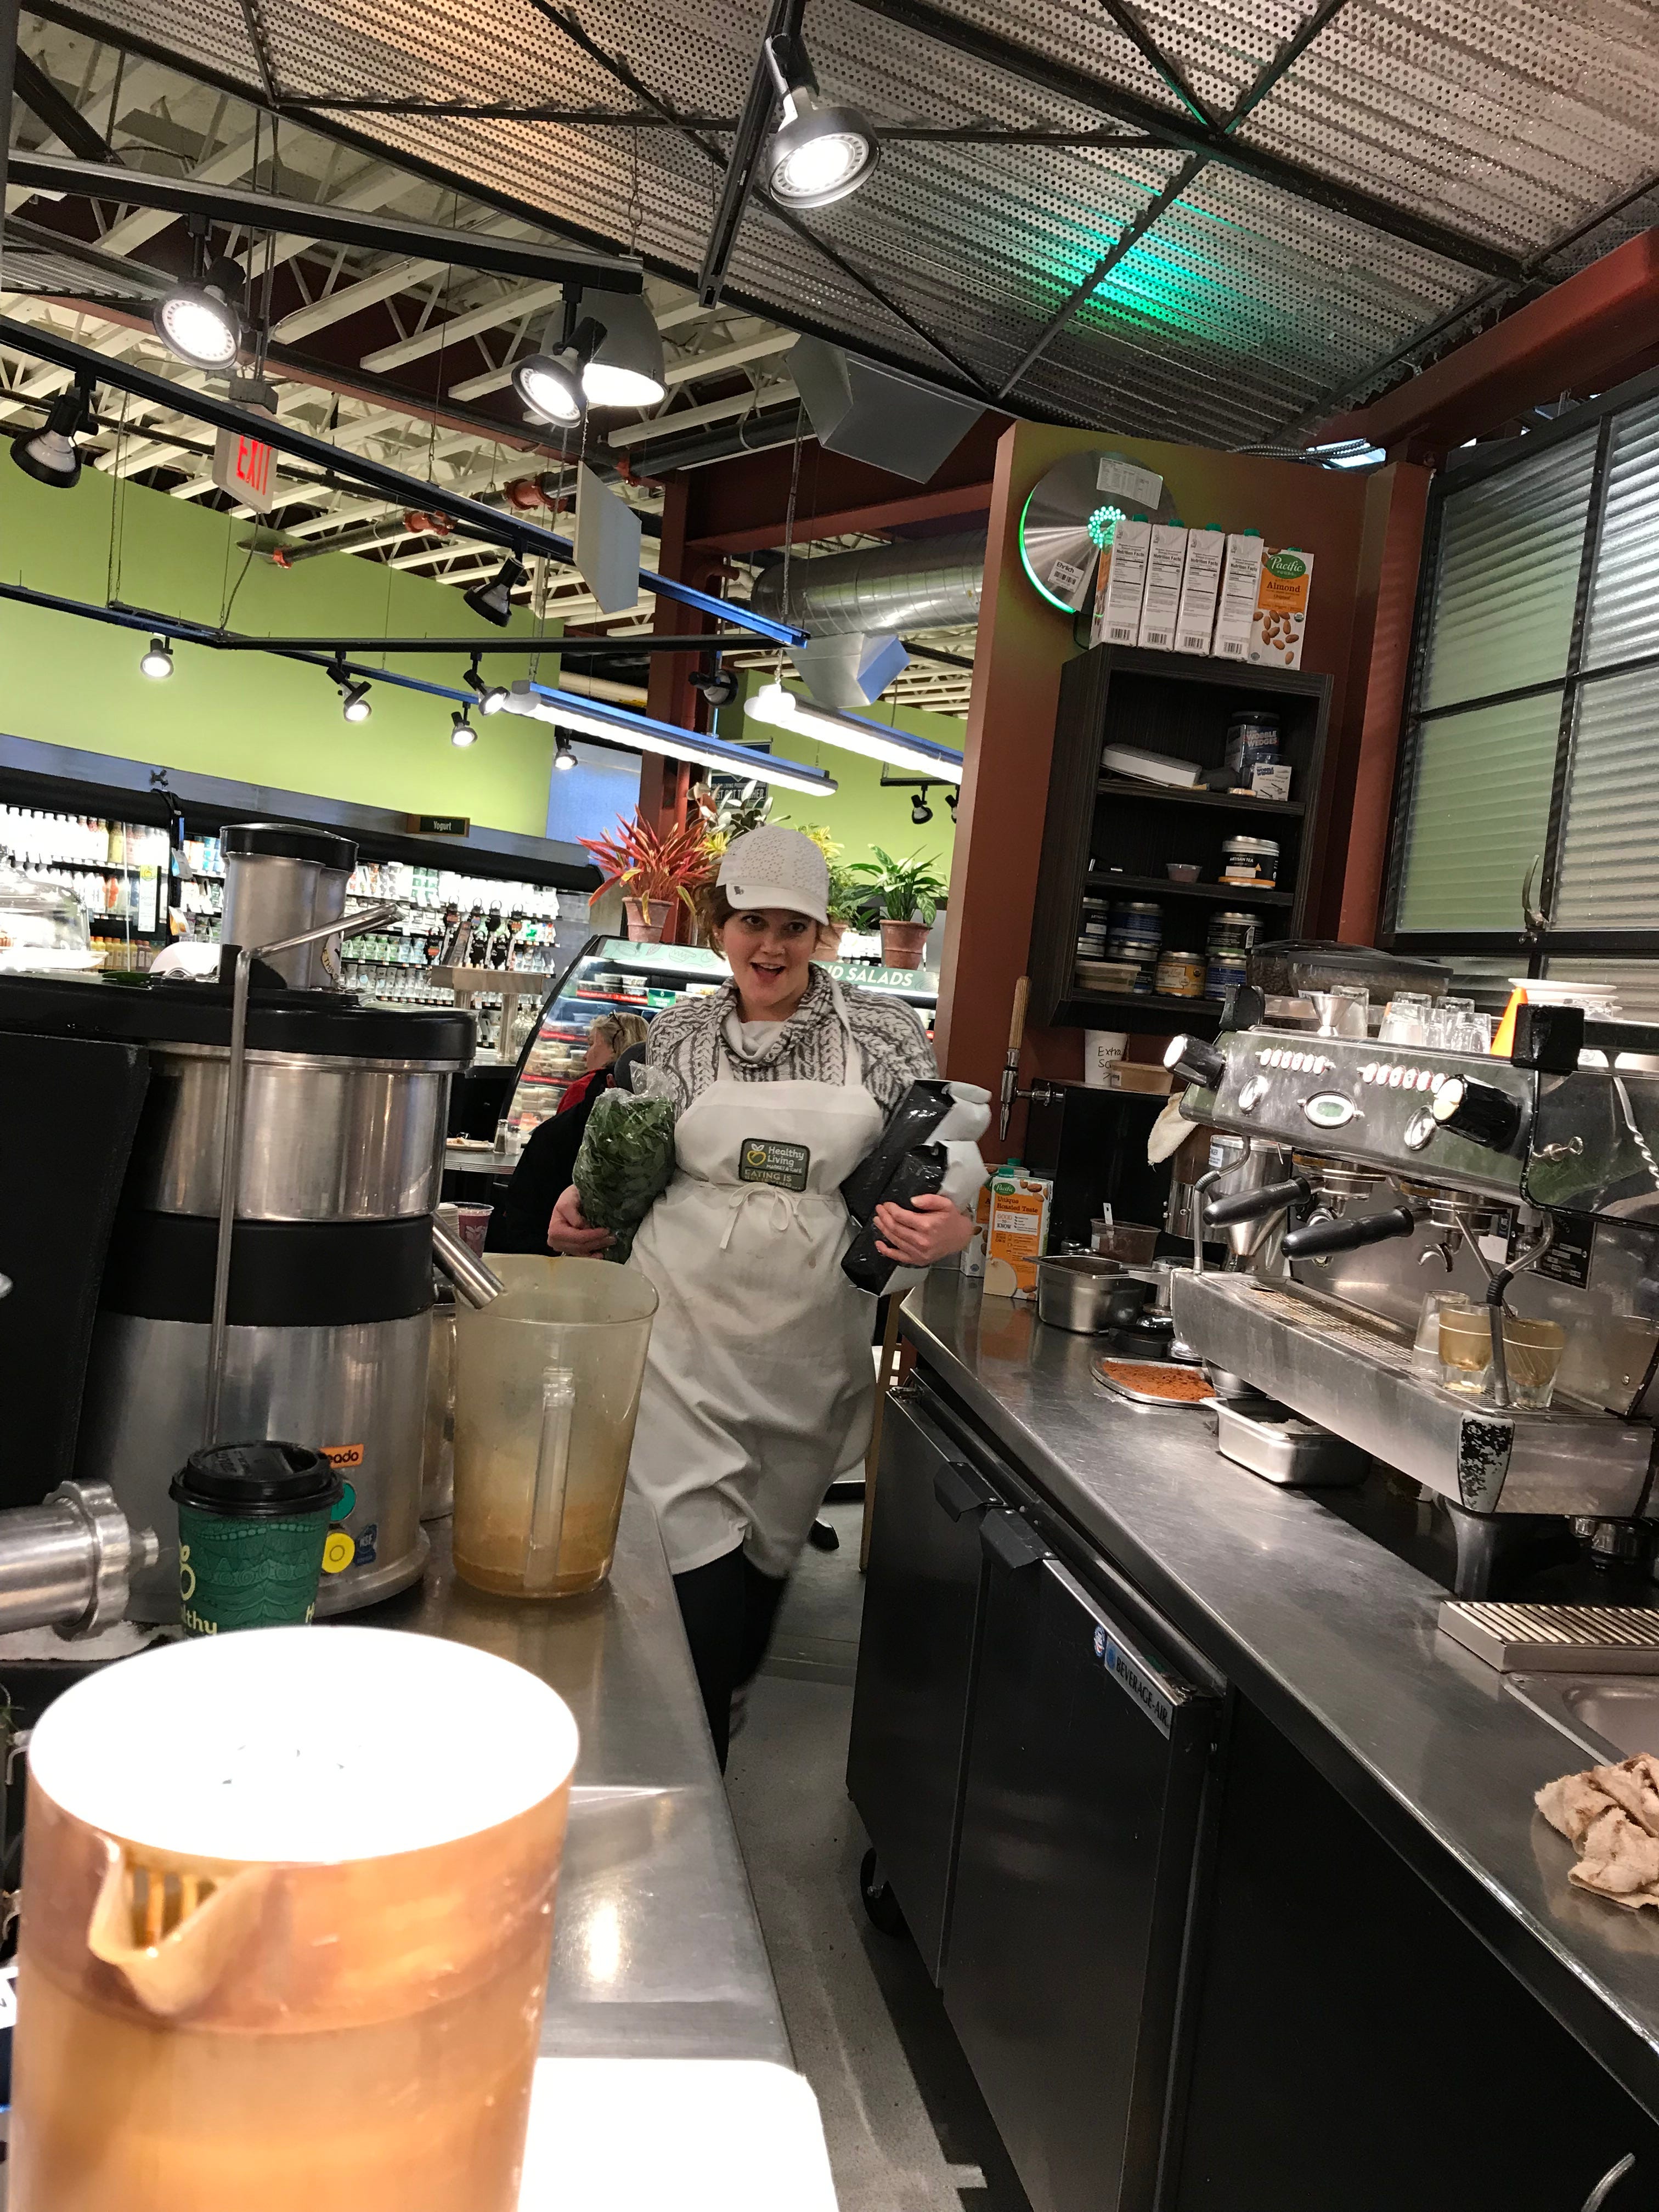 Melissa Cohen does a little dance while walking behind the barista bar at Healthy Living Market & Cafe on April 3, 2019. She's almost finished with her shift, which ends at 2 p.m.